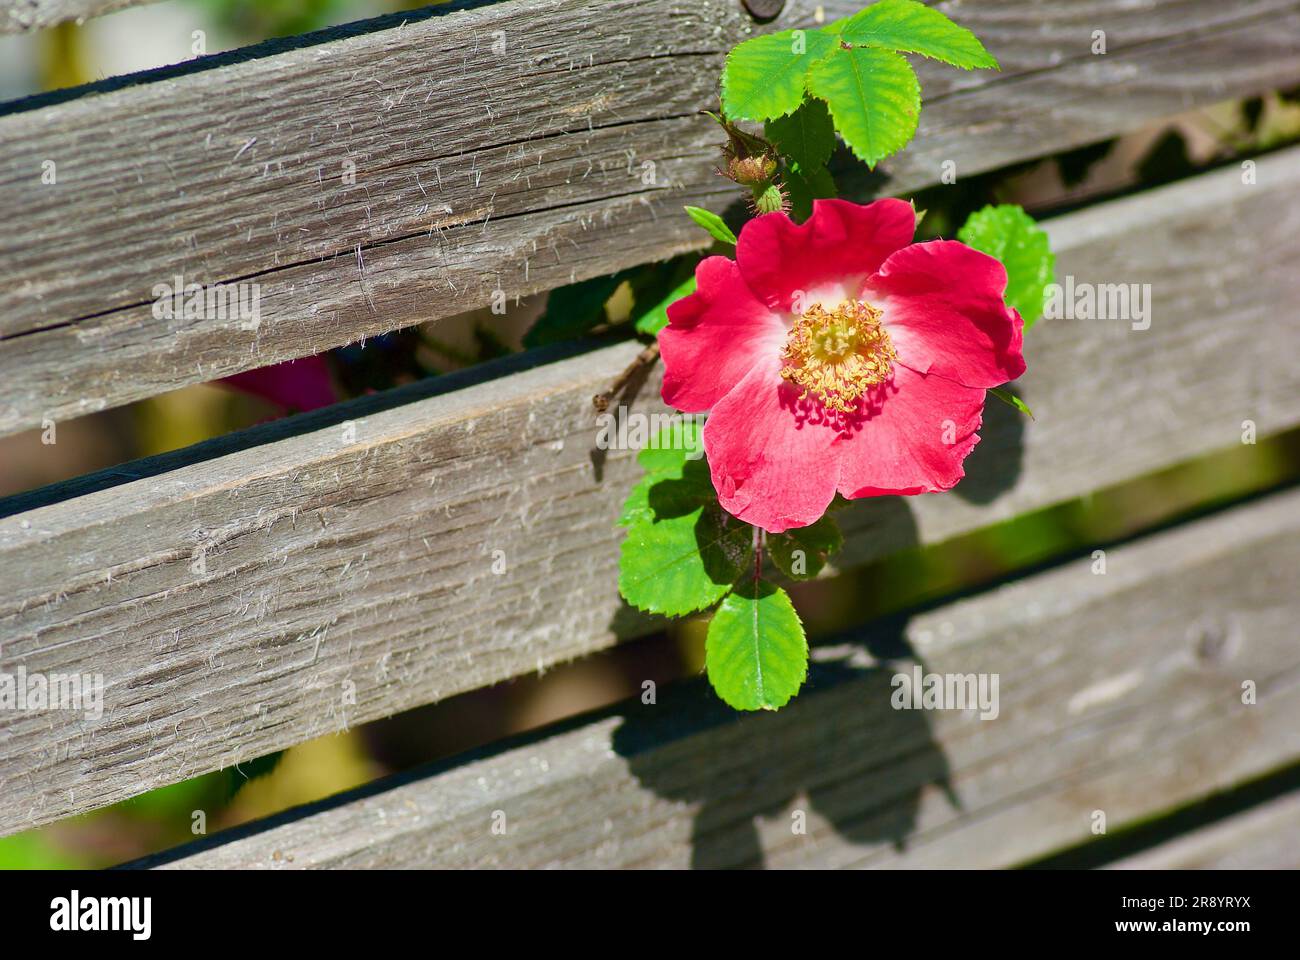 Twig with pink dogrose and green leaves hanging in front of gray plank background. Stock Photo